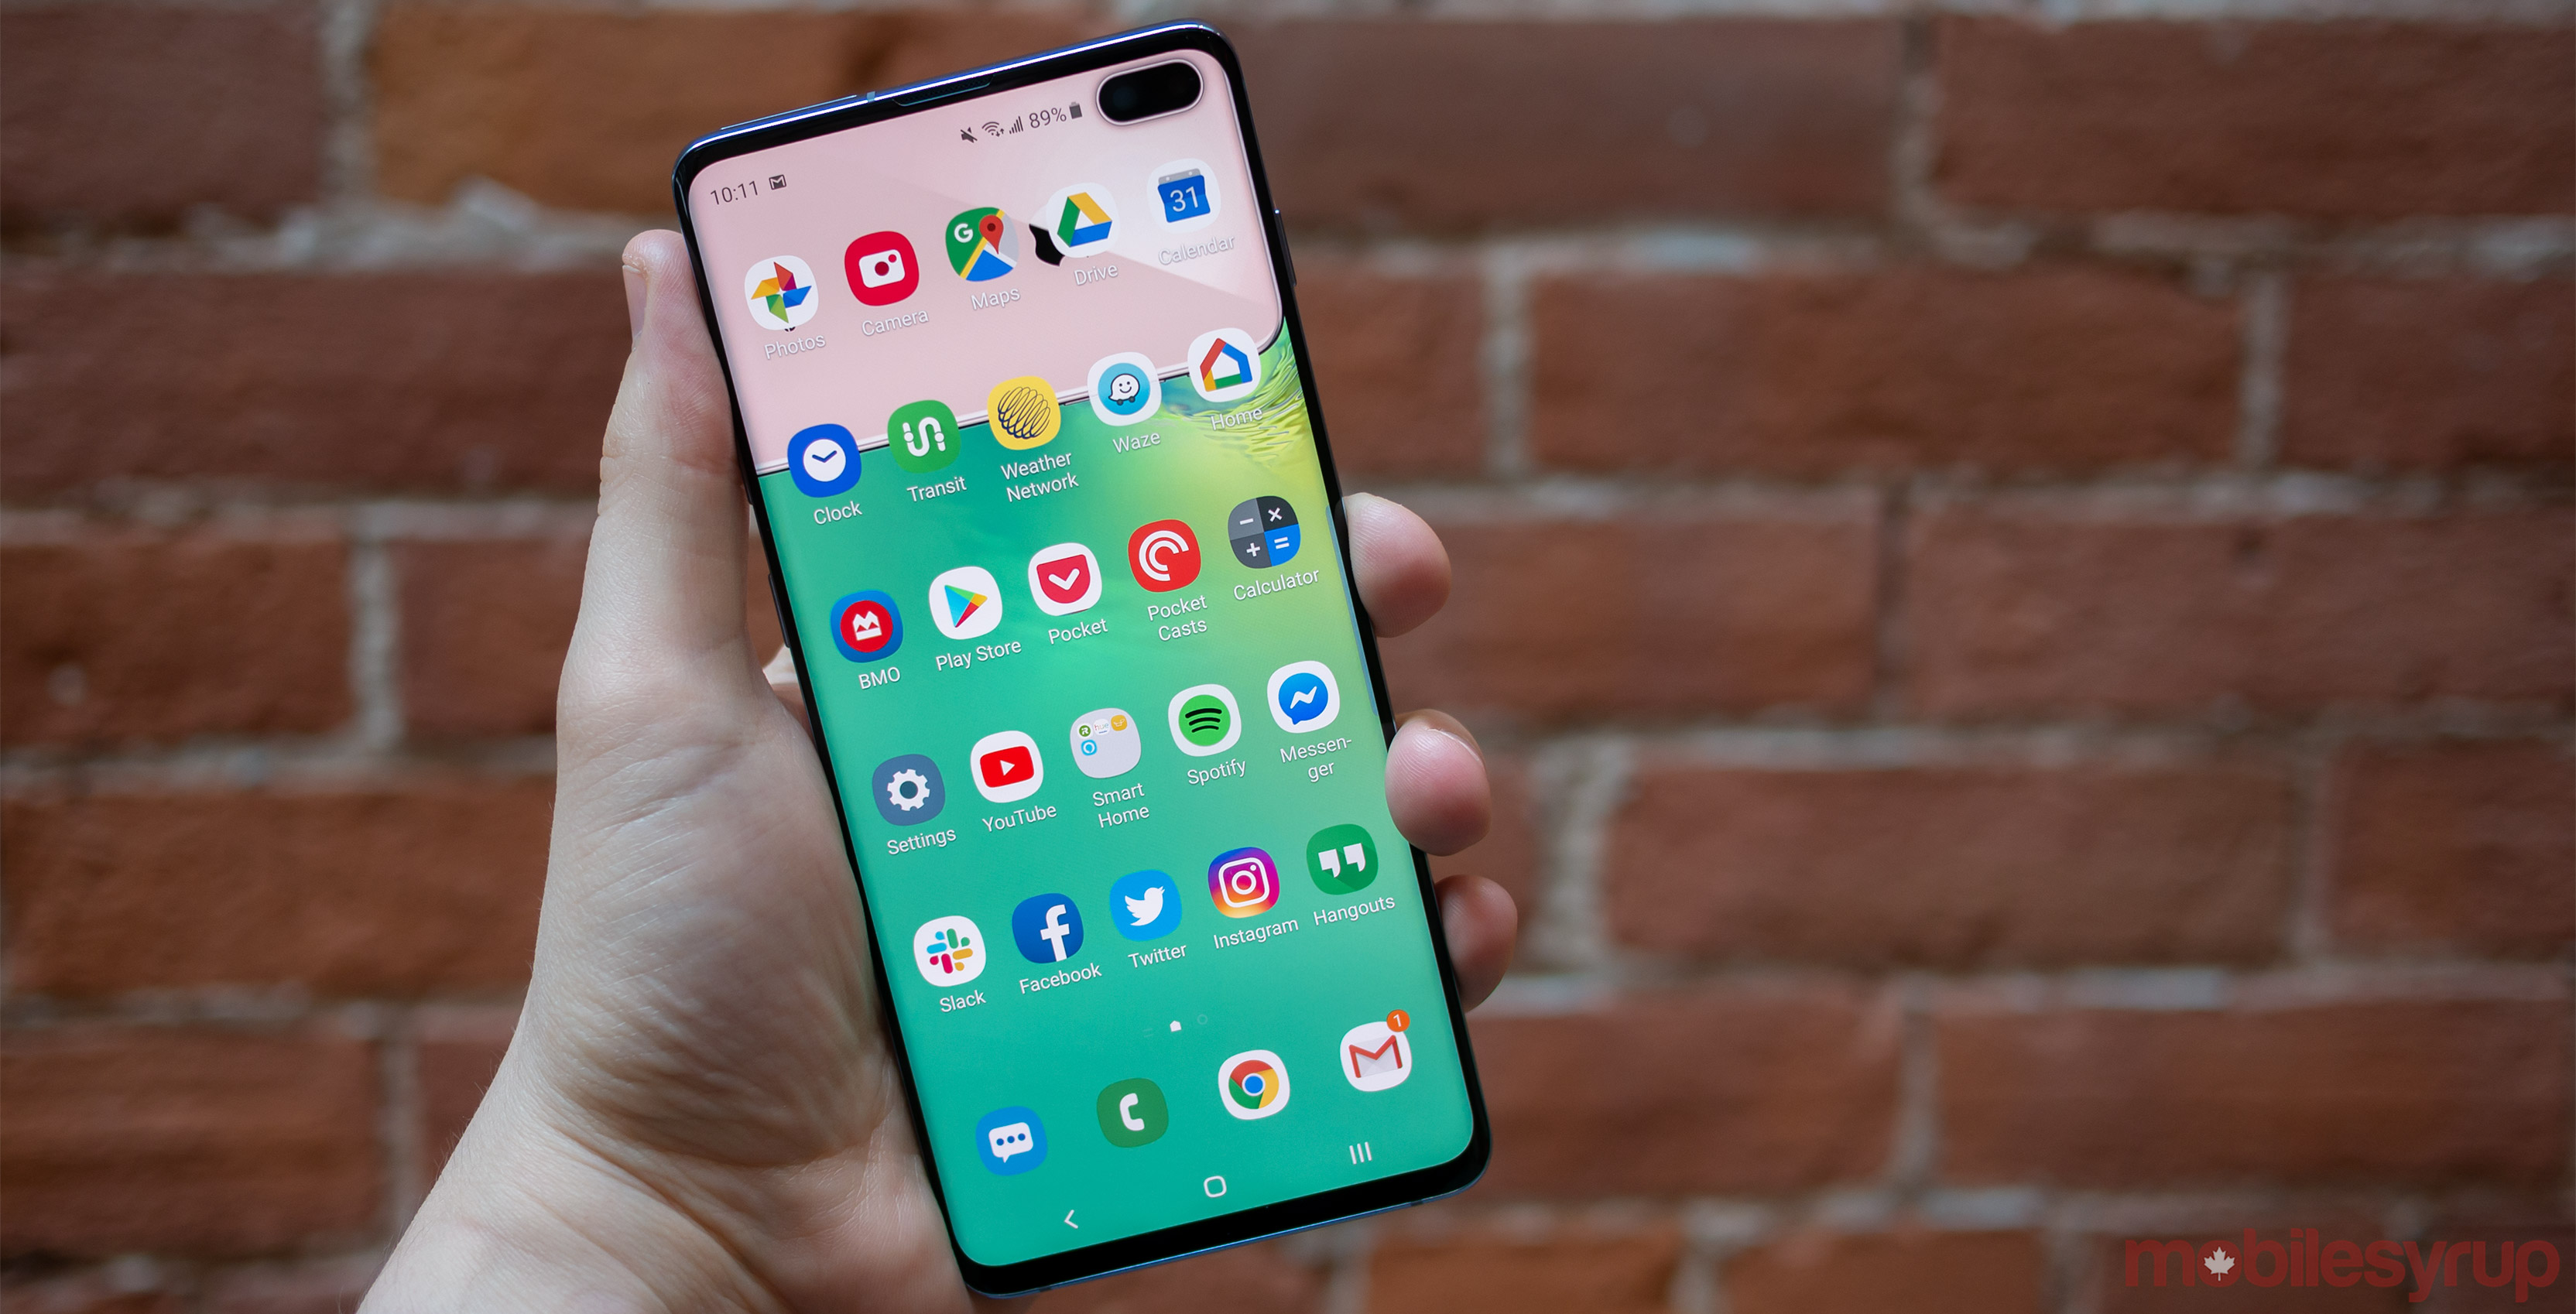 There's now a handy subreddit dedicated to Galaxy S10 wallpapers